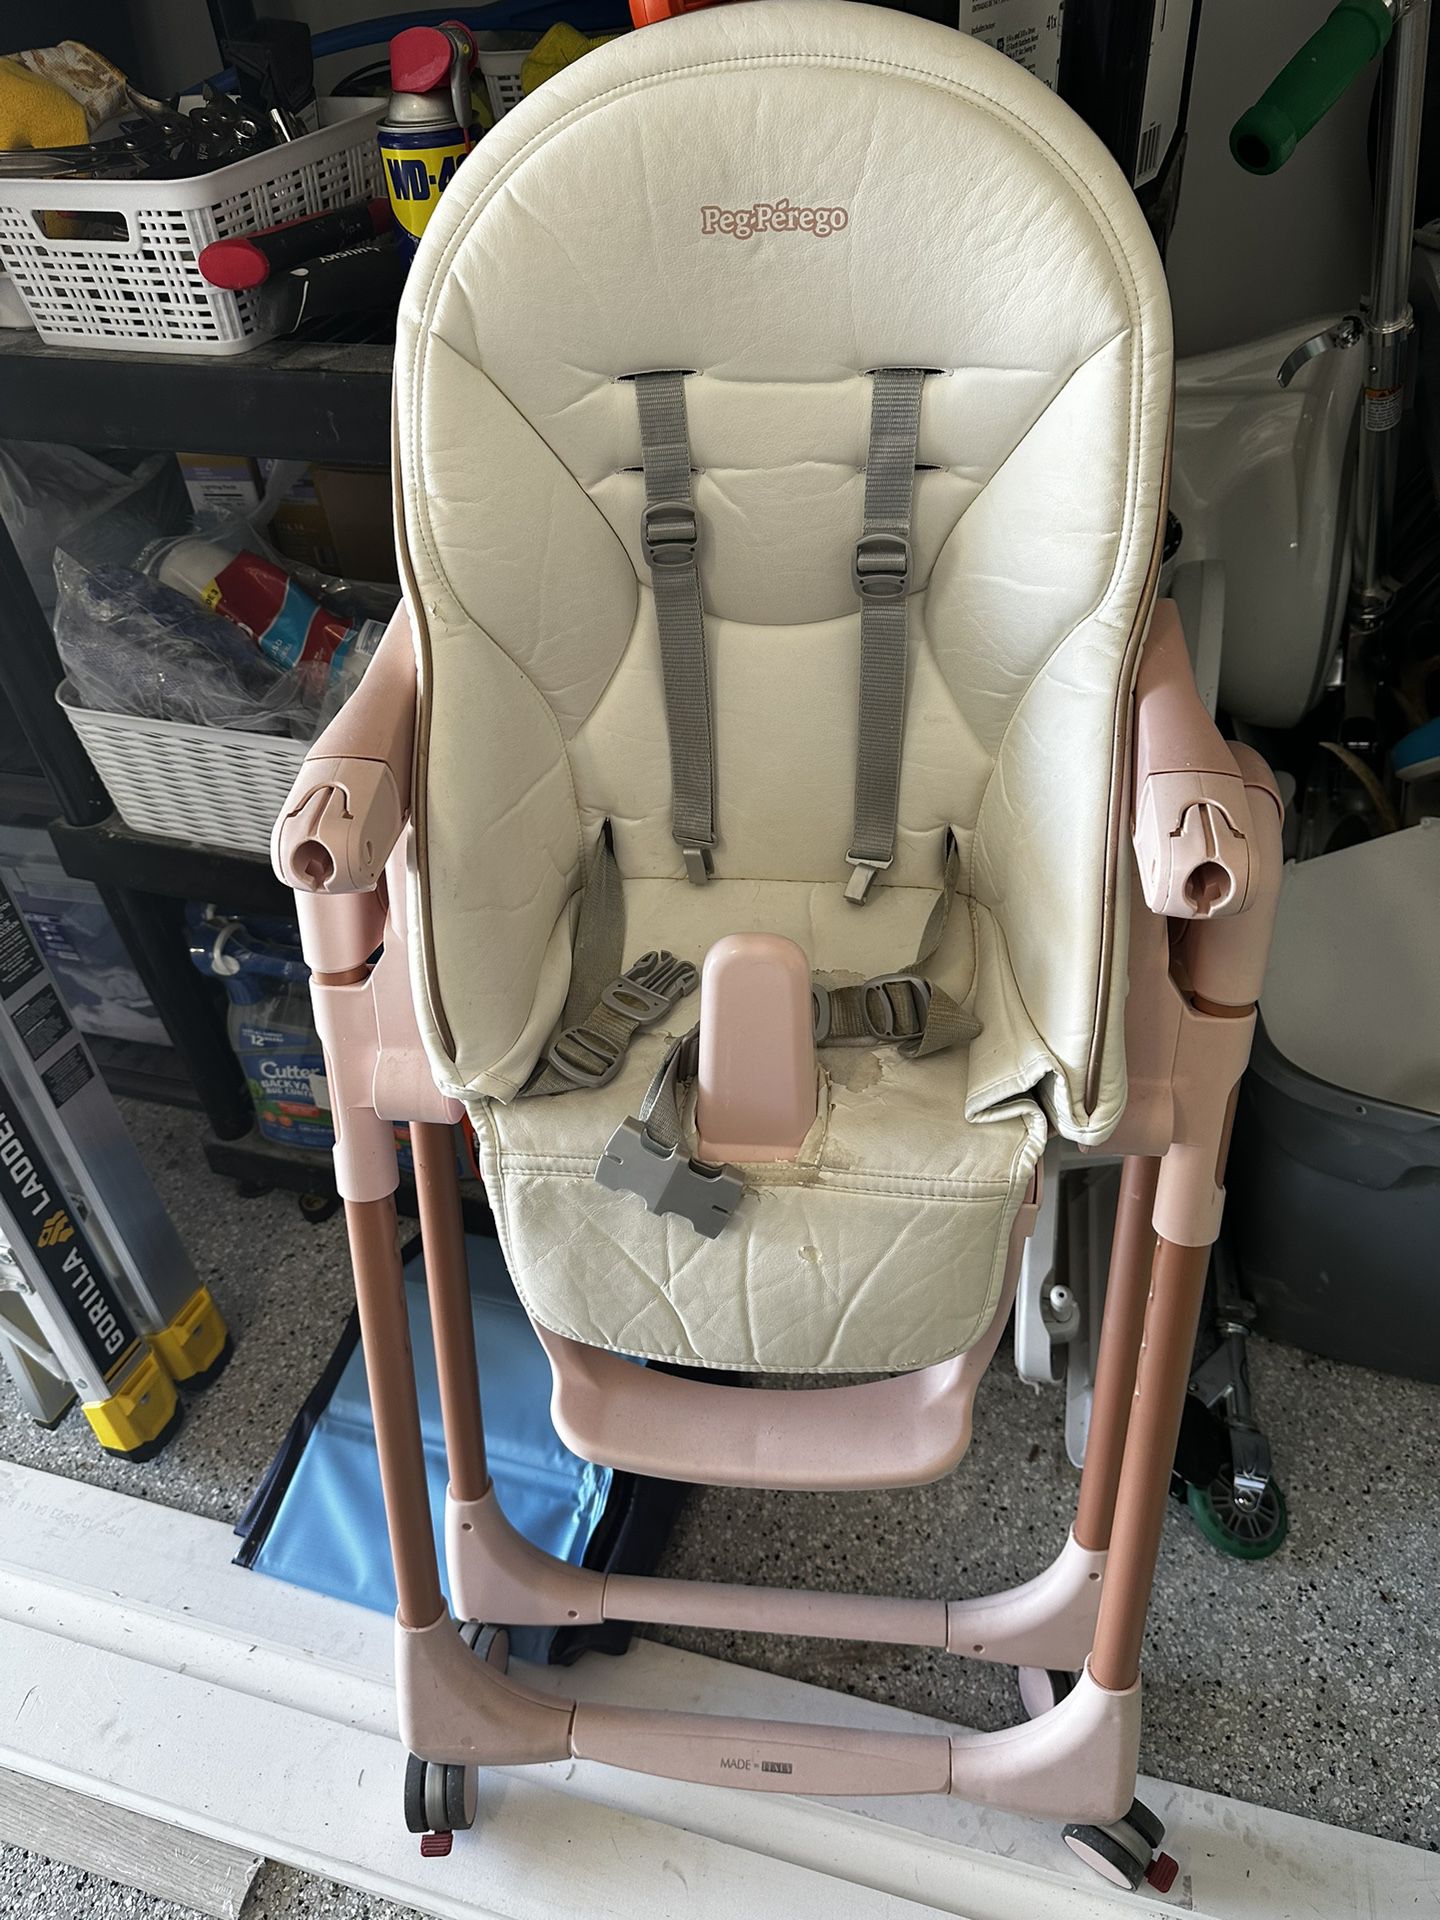 Peg Perego High Chair (Pink)